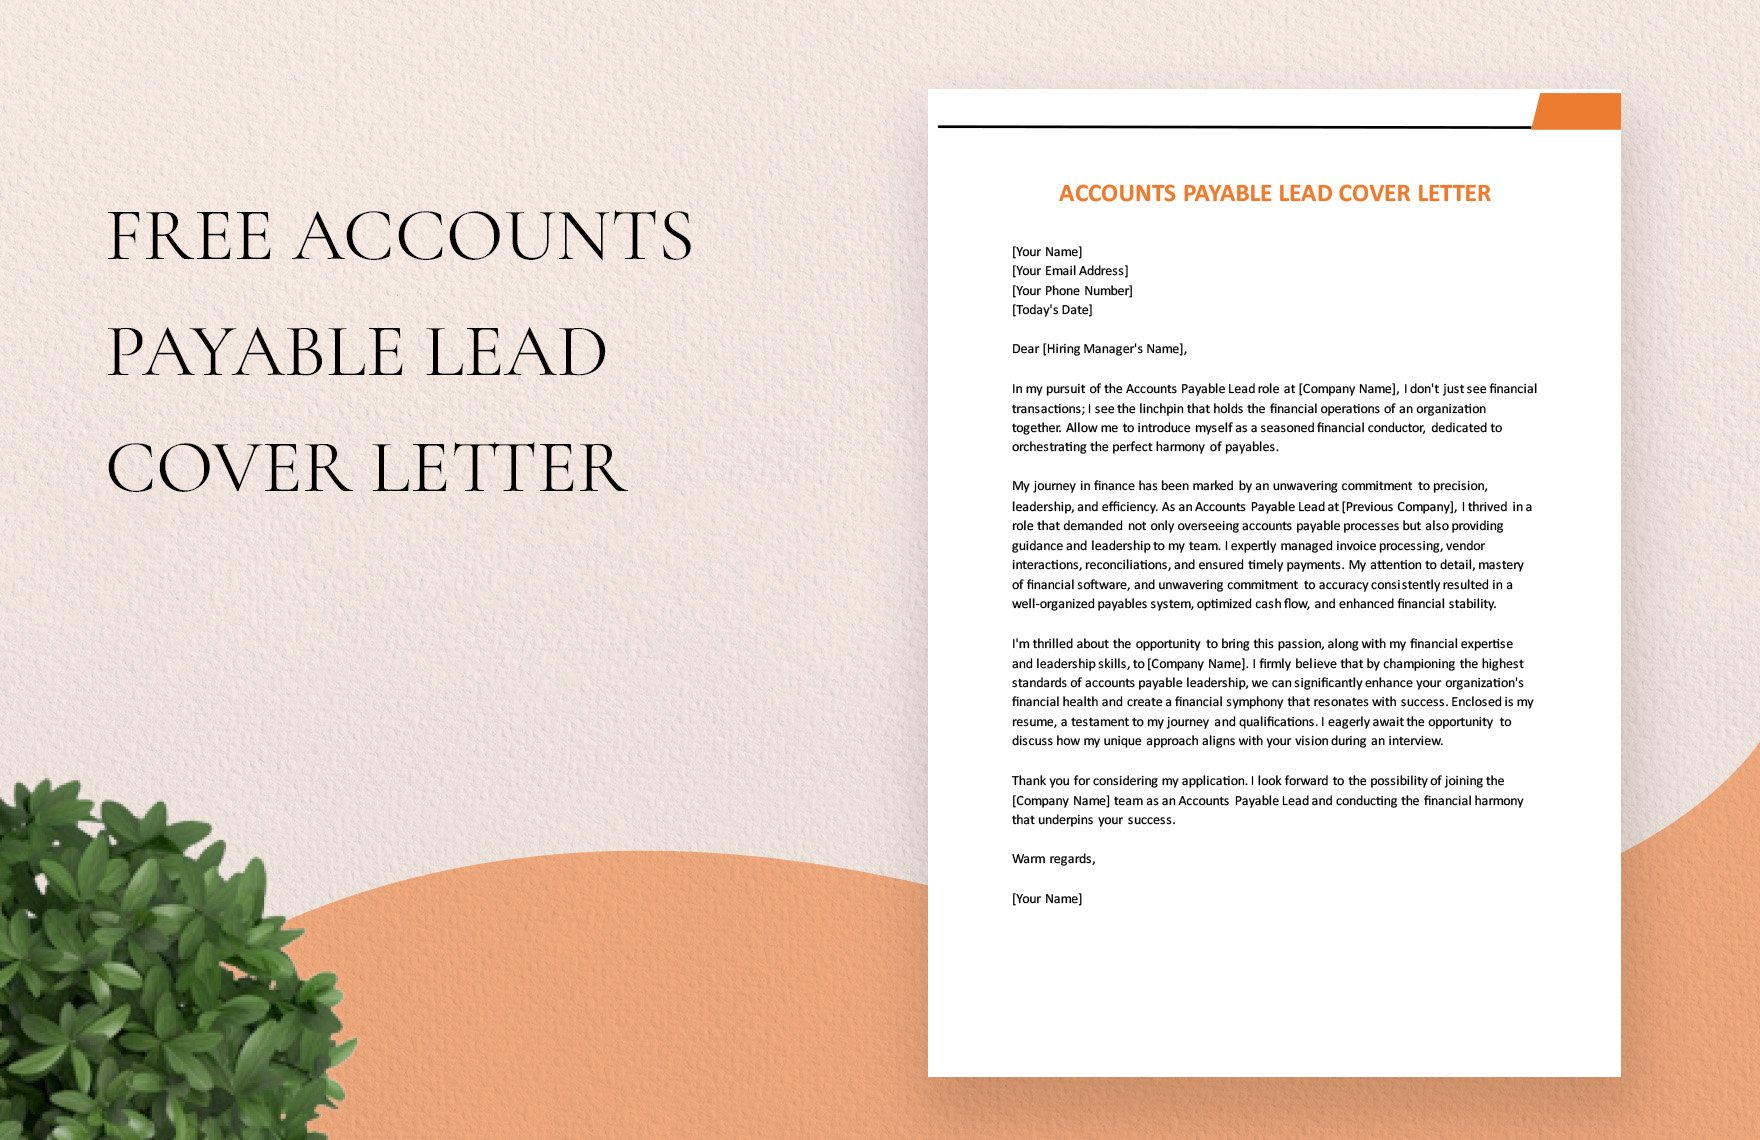 Accounts Payable Lead Cover Letter